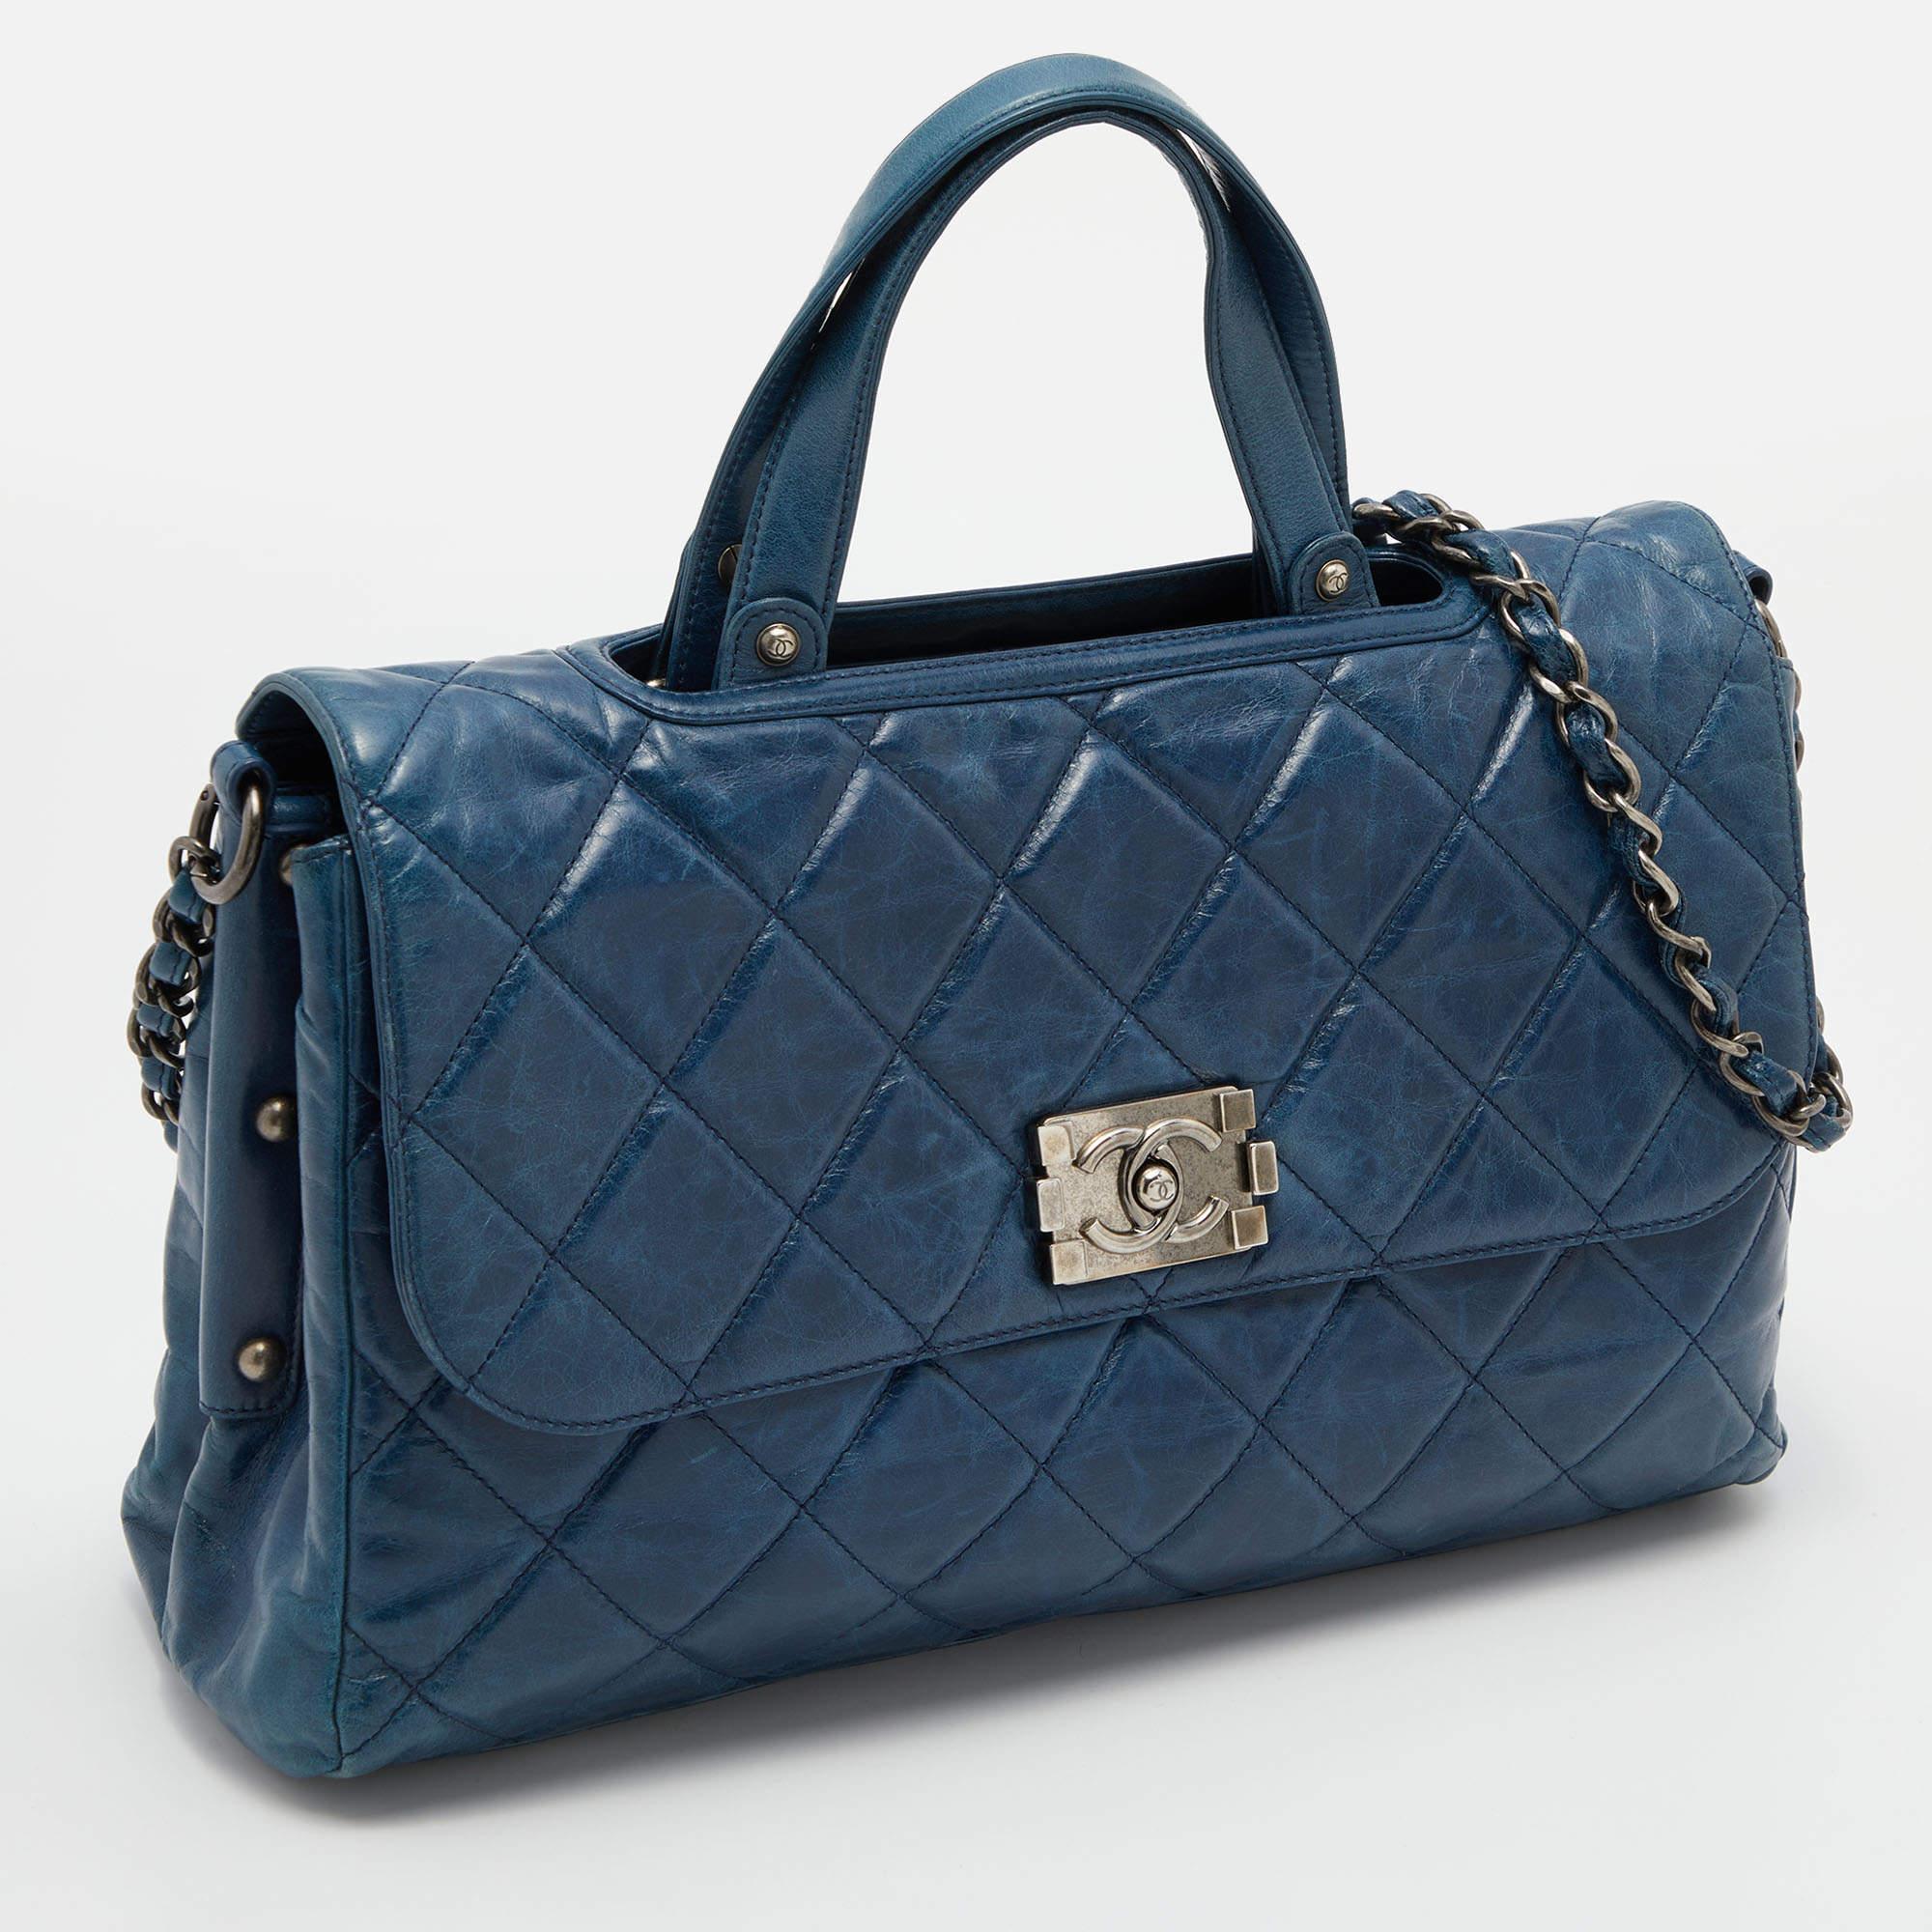 Women's Chanel Blue Quilted Glazed Leather Large Convertible Boy Bag